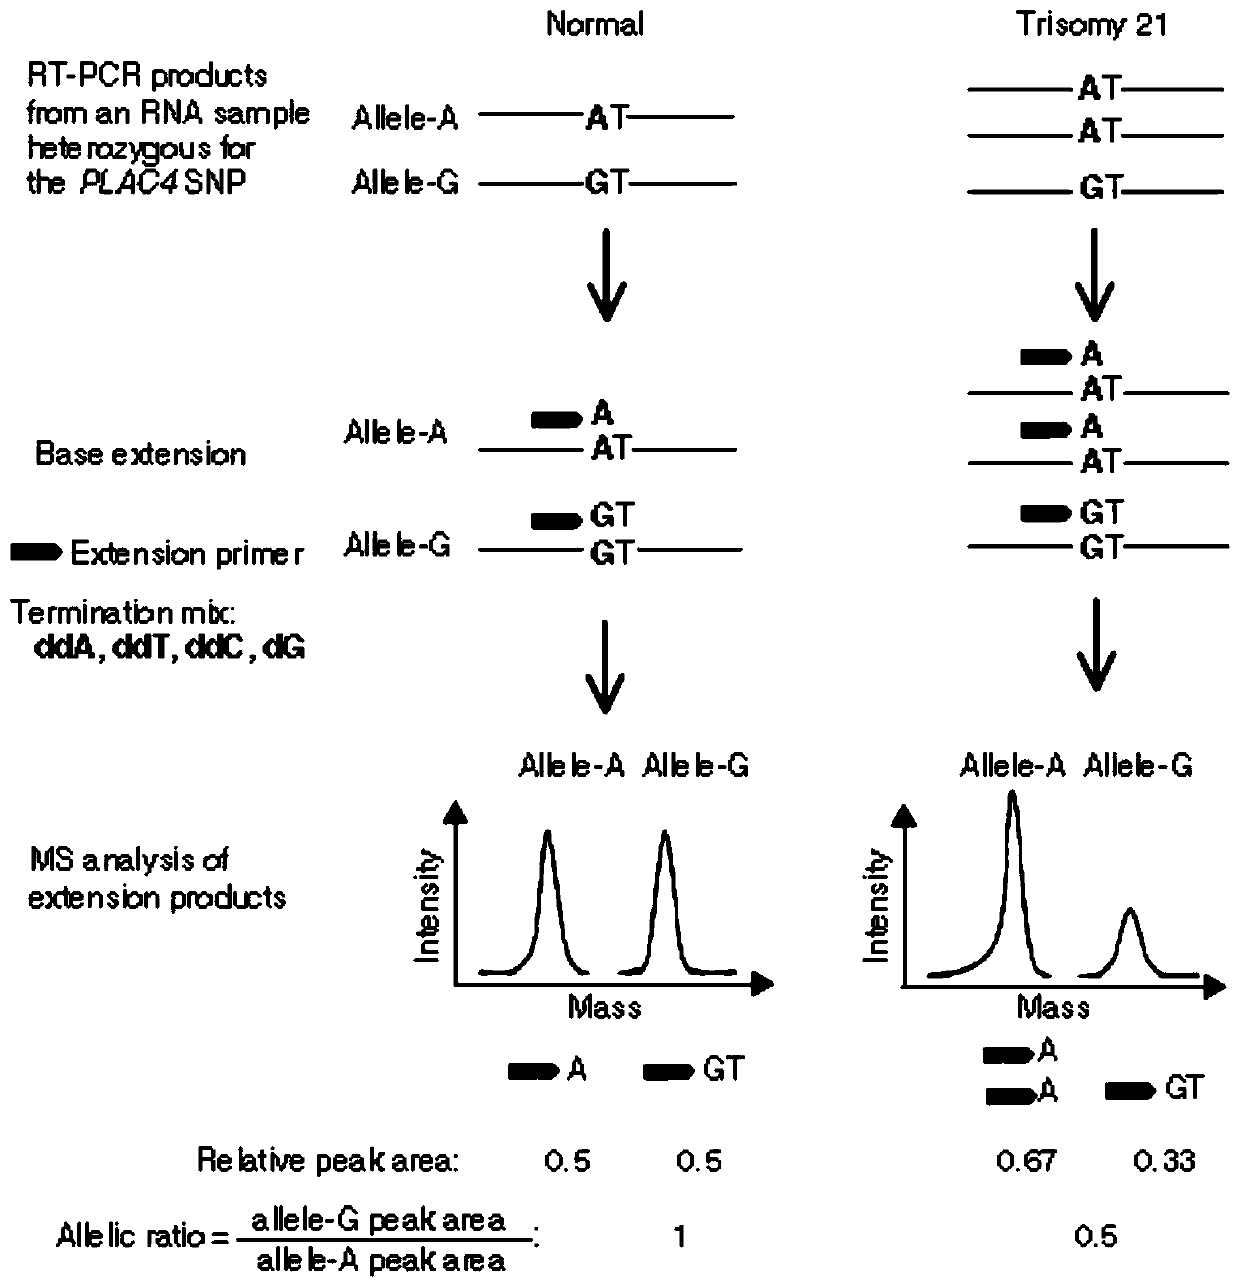 Kit for detecting pregnant woman peripheral blood free RNA screening 21-trisomy syndrome based on time-of-flight mass spectrometry